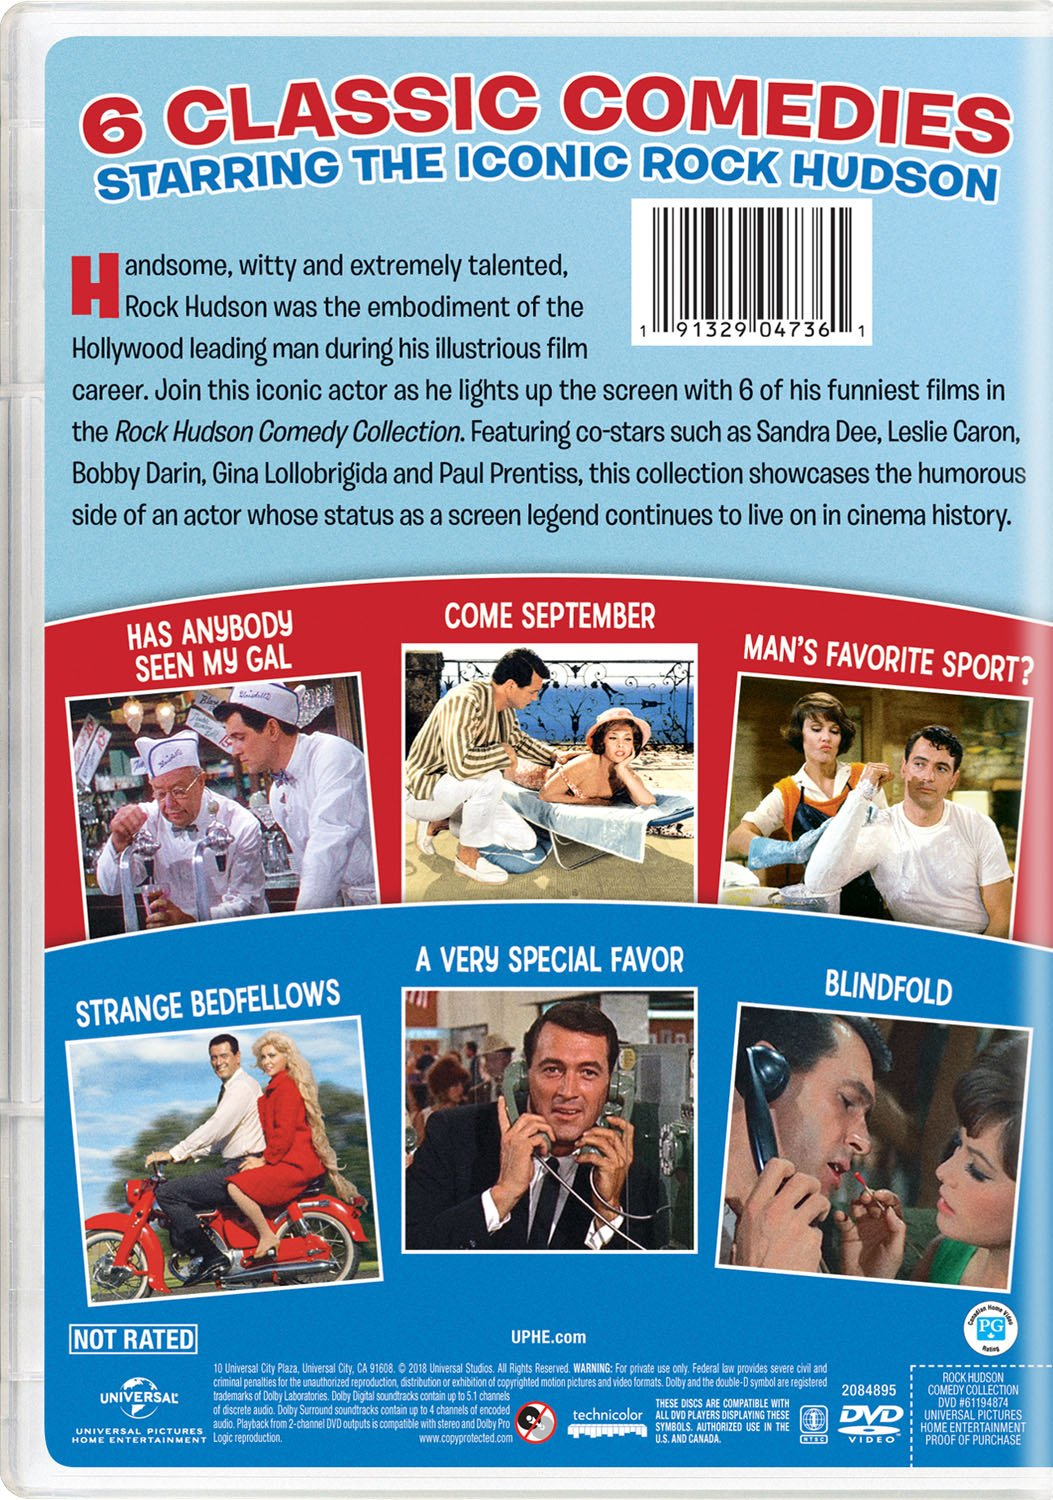 Rock Hudson Comedy Collection: 6 Classic Movies (DVD), Universal Studios, Comedy - image 2 of 2